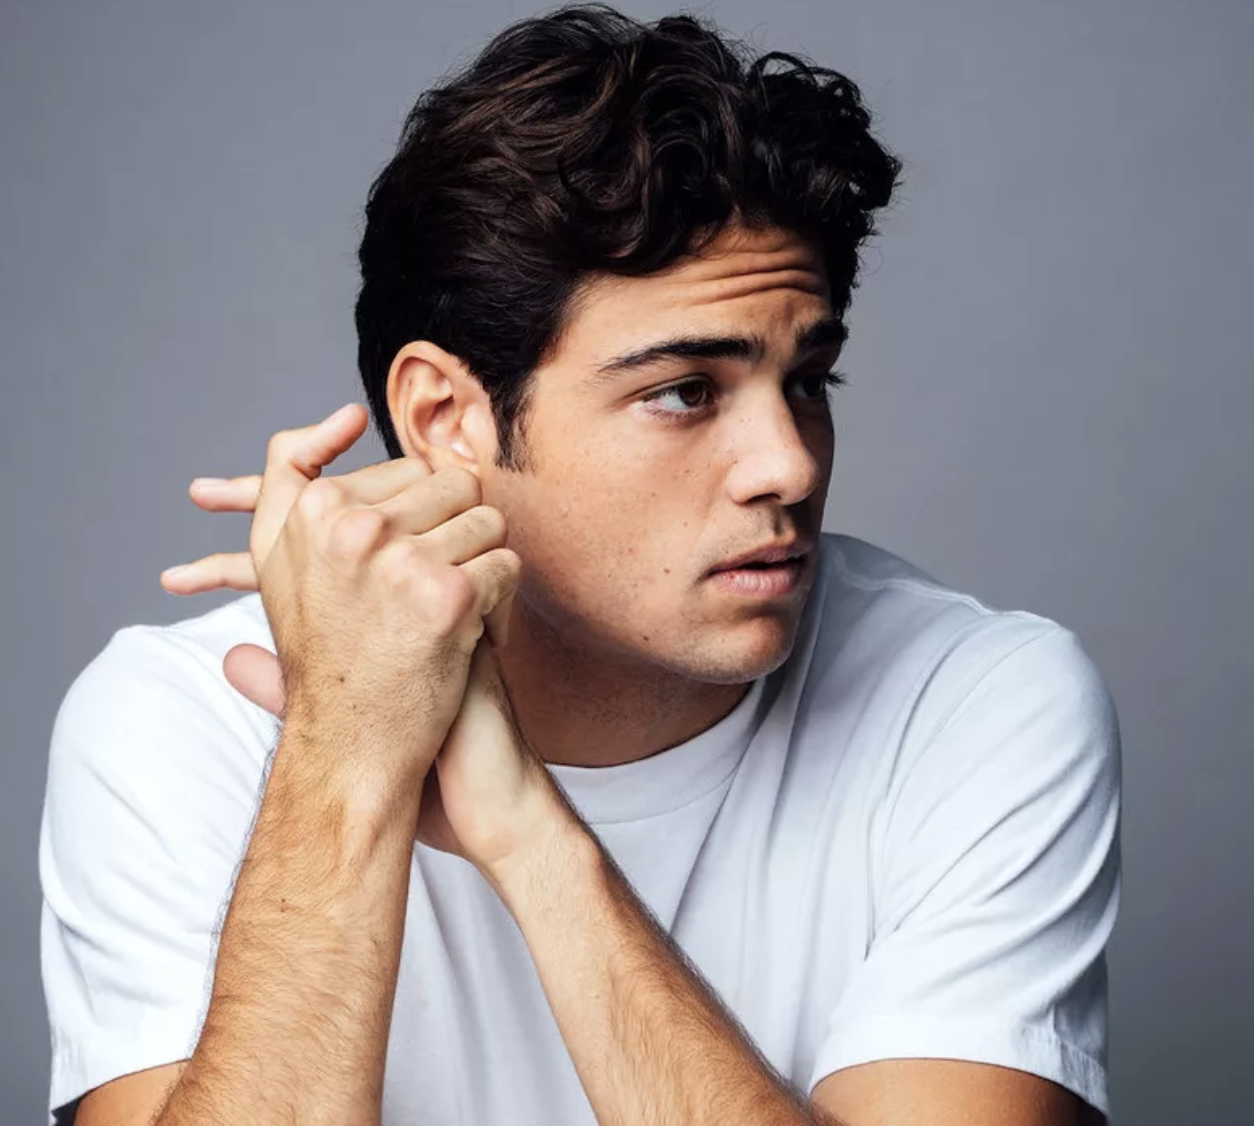 Here's A Test To See If You Can Resist Noah Centineo's Charm1254 x 1126